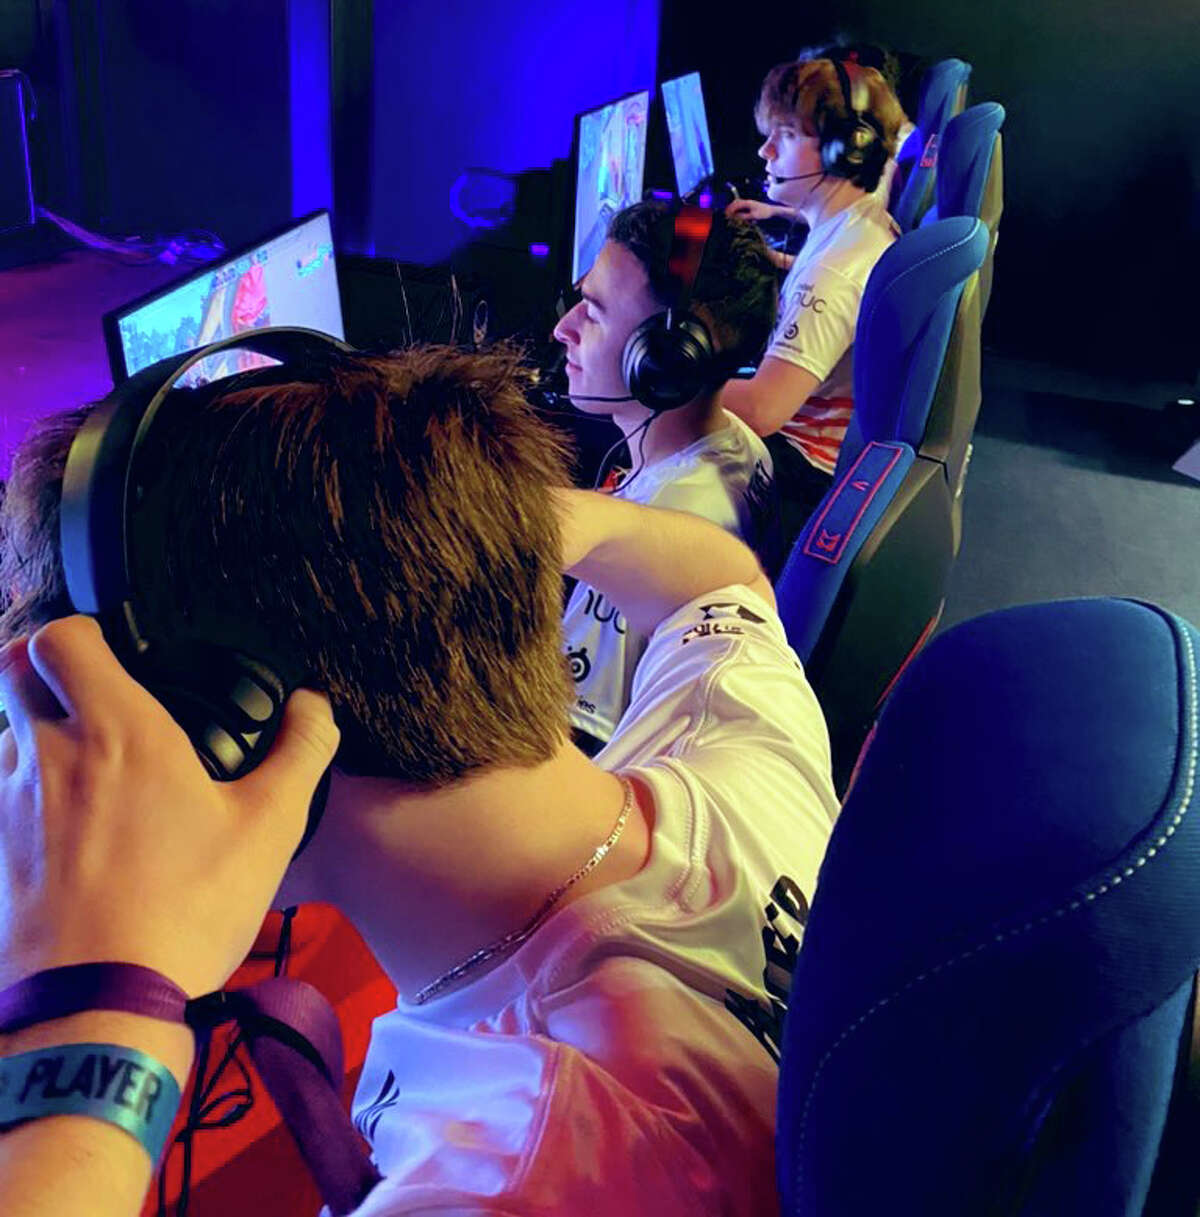 Five Northwood University gamers are representing Team USA at the Dec. 13-16 Red Bull Campus Clutch World Final in Sao Paulo, Brazil.